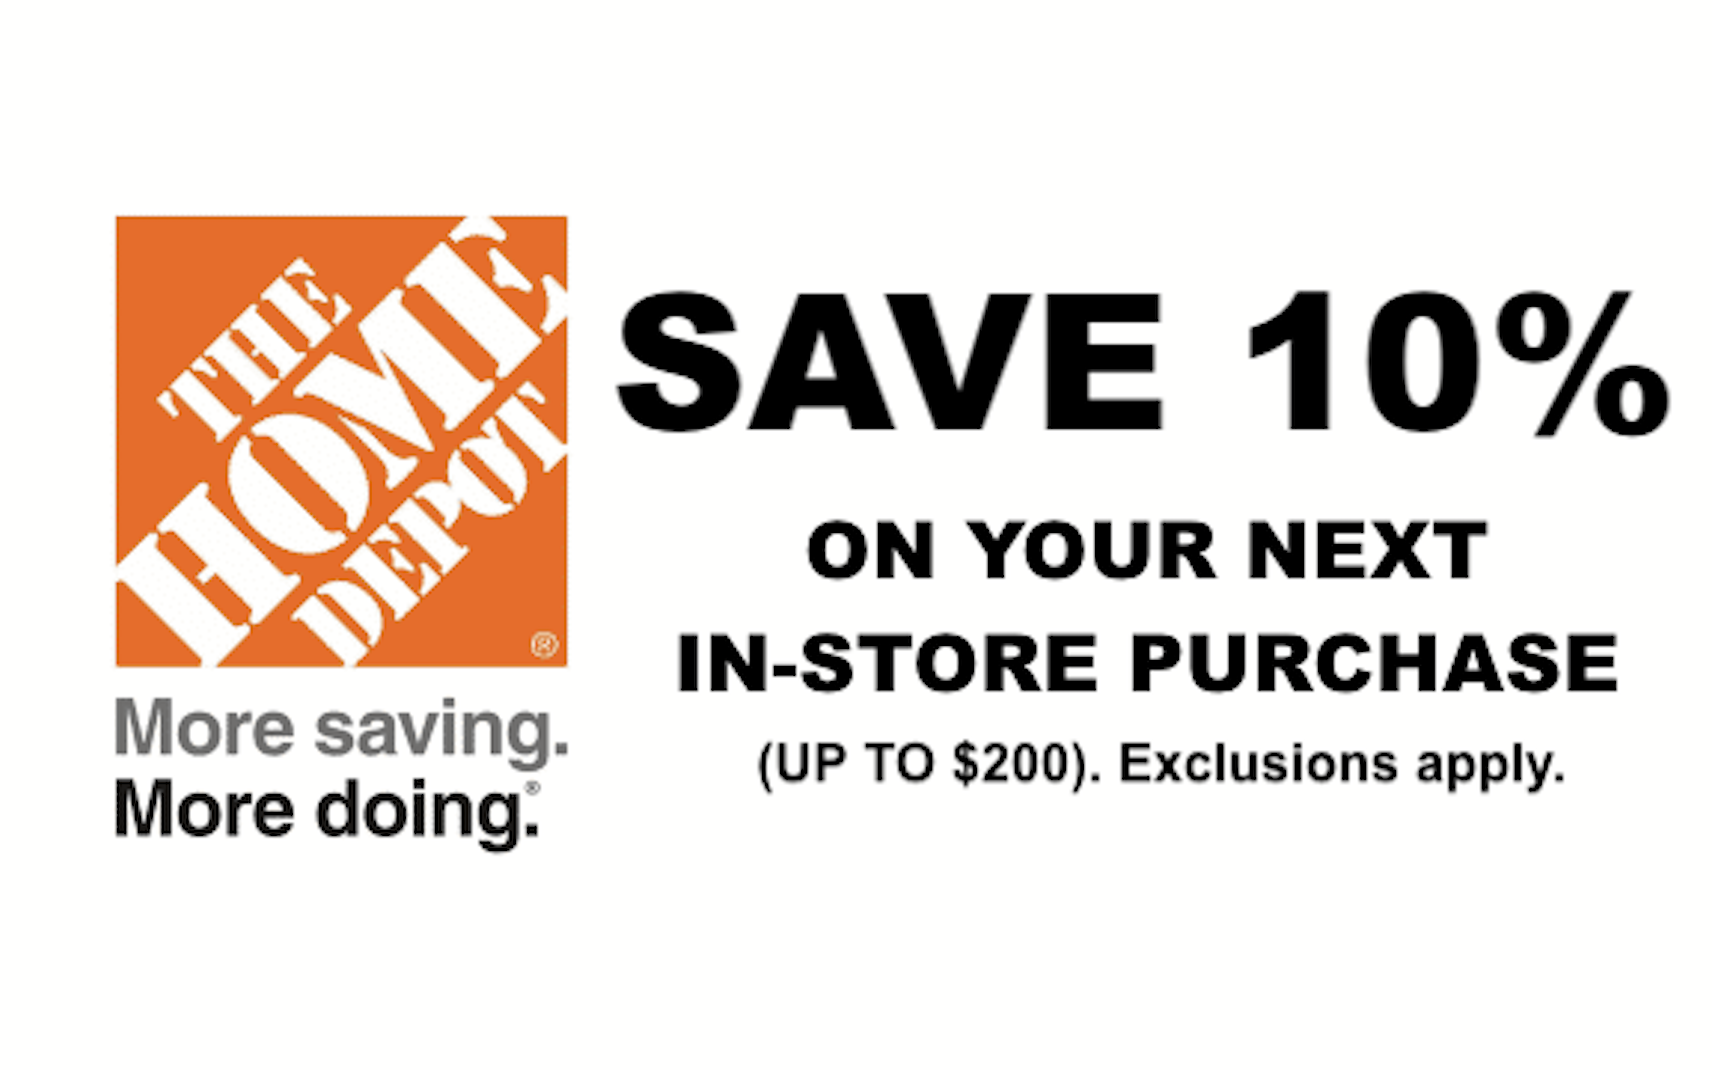 Home Depot 10% Off Printable Coupon Delivered Instantly to ...